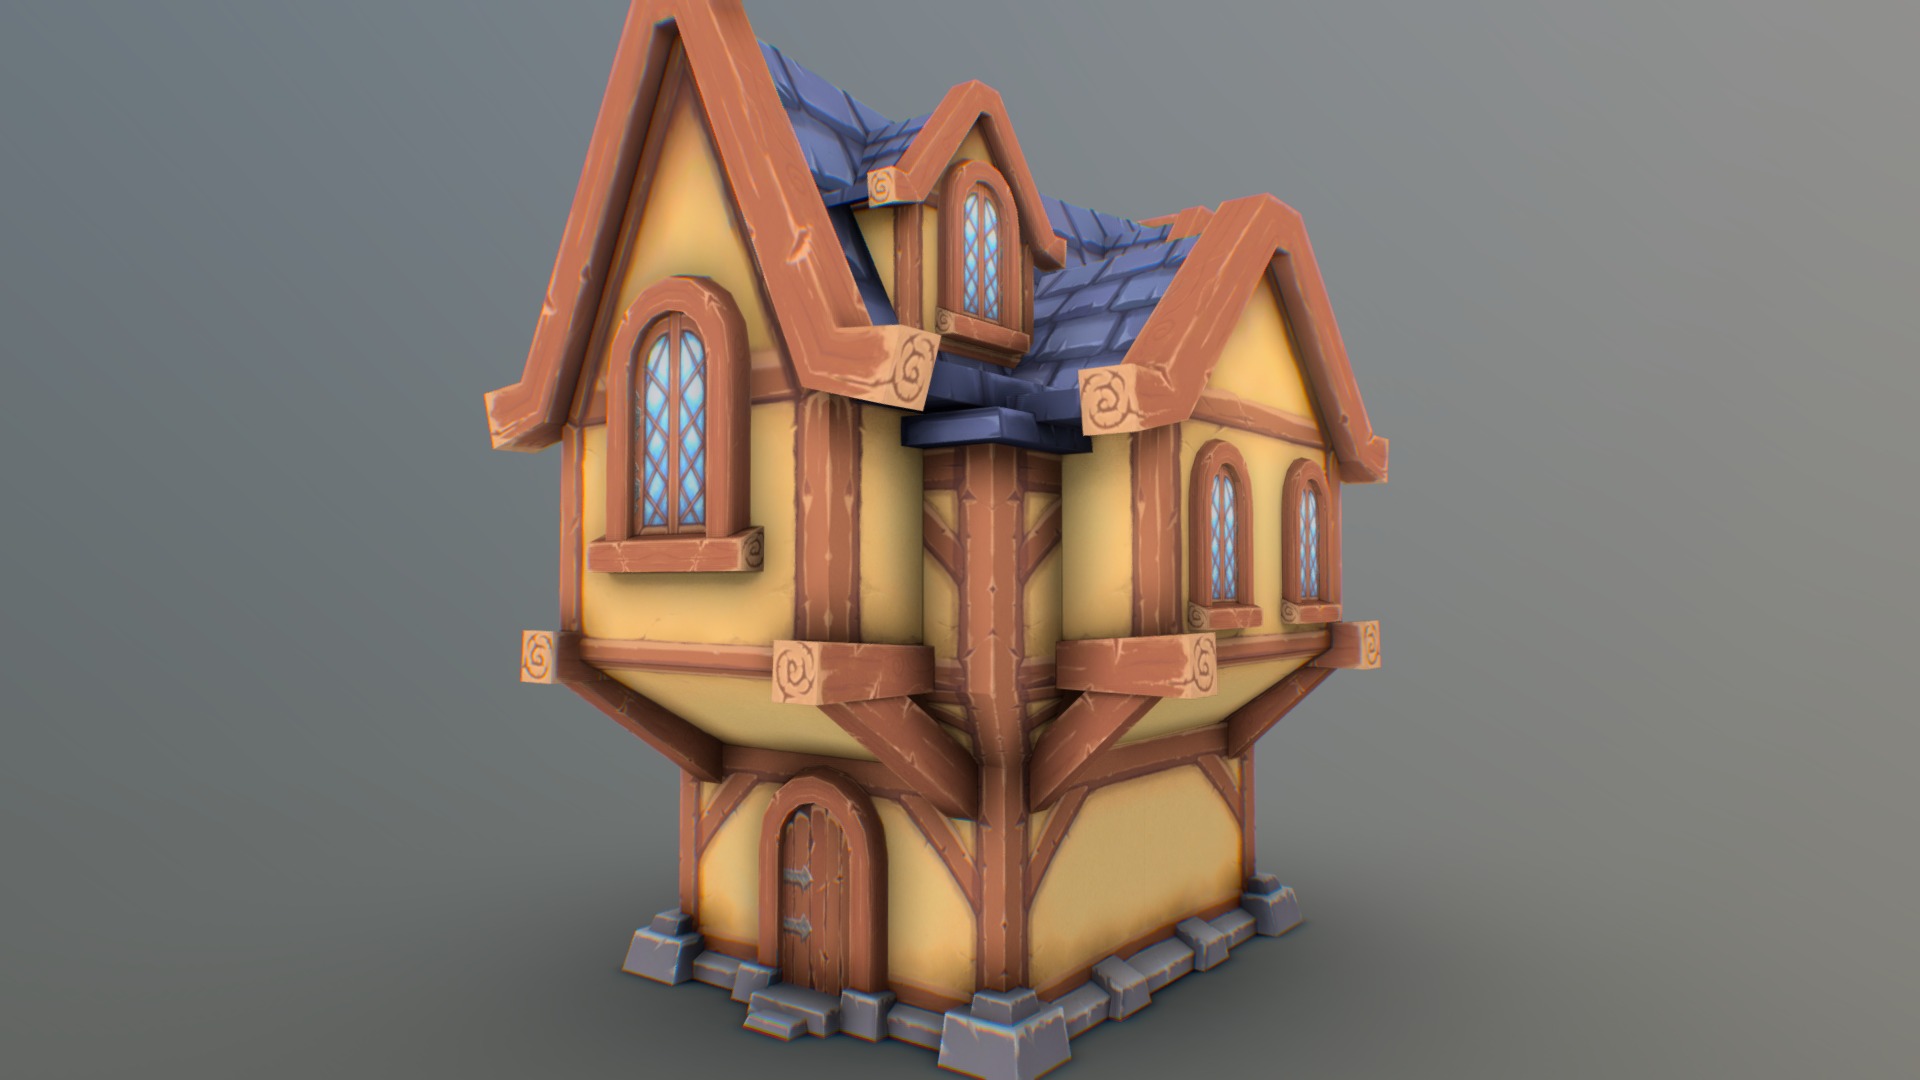 I came across this amazing hand-painted house by Antonio Neves:
https://www.artstation.com/artwork/low-poly-house

I need to practice making World of Warcraft environment models, (wanna work for Blizzard so bad!), so I had to take a stab at making this house myself!  

My goal was to gain experience with this fast workflow.  I actually threw down a bit of paint in blender while very roughly blocking in and UVing the house, to get me an idea of what I could get away with tiling.  Then I opened the simple texture in Ps to arrange the islands and actually paint it nicely.  Back to blender, re-alligned the UV islands, then created a second set of UVs, and baked a couple maps for light mapping. Mixed those in Ps, and figured out how to get UV sets into Sketchfab.  Done!
I think I finished this in only 9 hours!  Fast for me!   Stoked to get experience doing things for quick flat models.

Anyways, cred goes to Antonio Neves, I totally ripped this design off of him (for practice.)  - Hand-Painted Home (based on concept) - 3D model by therealmarkehlen 3d model